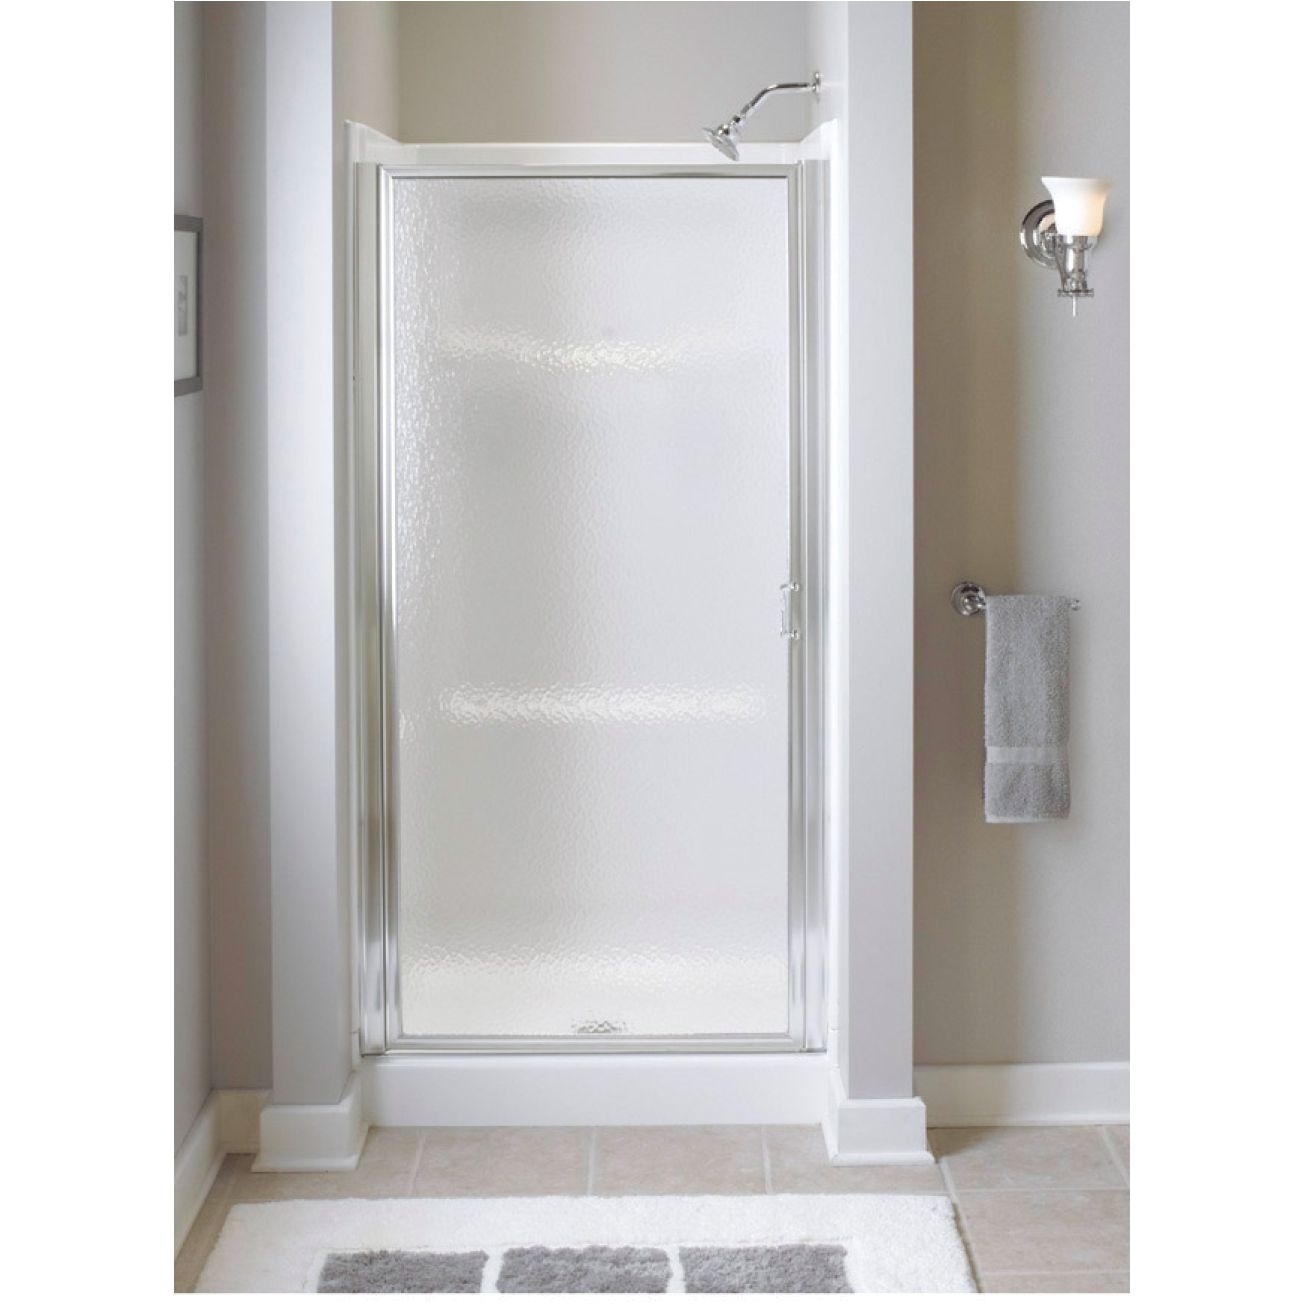 sterling 24in w x 64in h pivot shower door with silver frame 950c 24s tub shower surrounds ace hardware